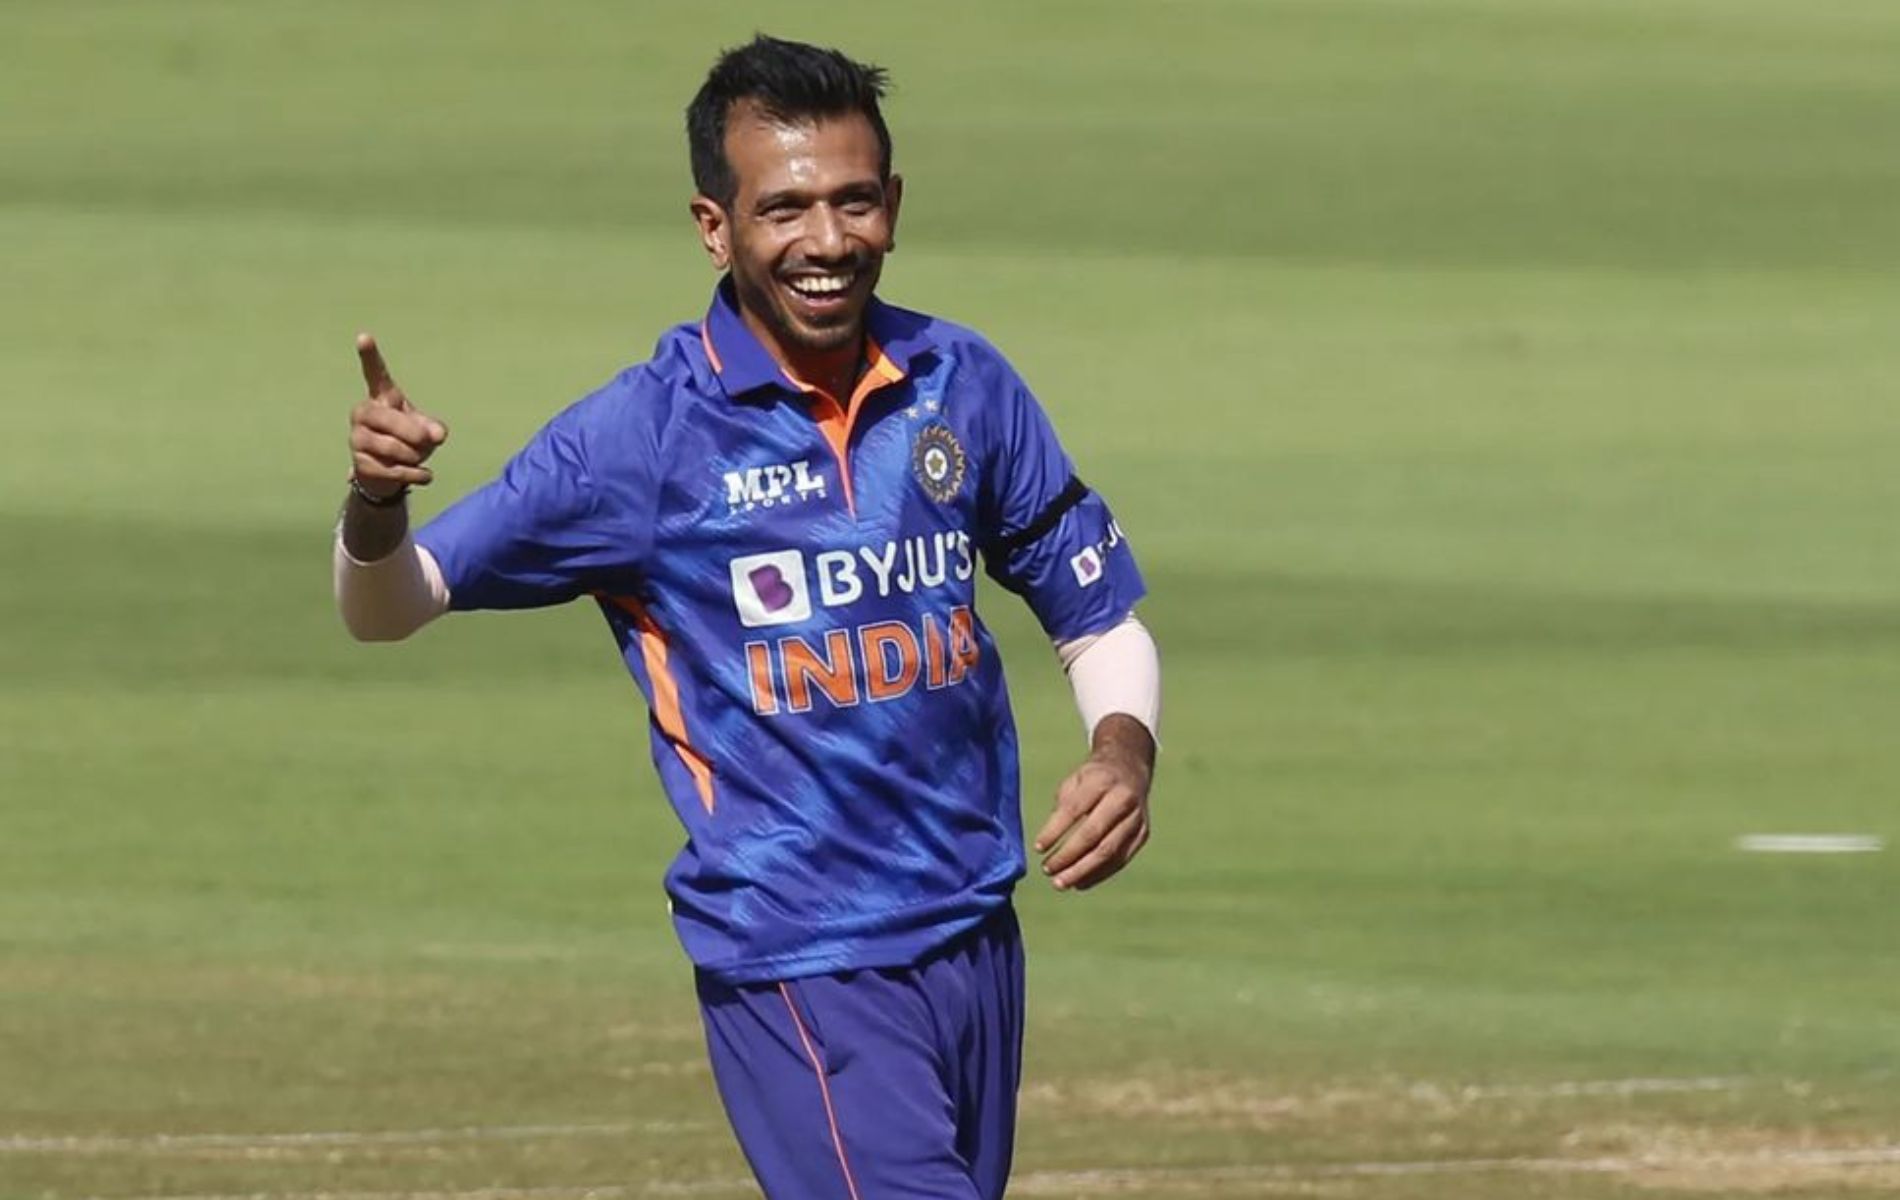 Yuzvendra Chahal had a rare off day in the business in the 1st T20I (Image: Instagram)